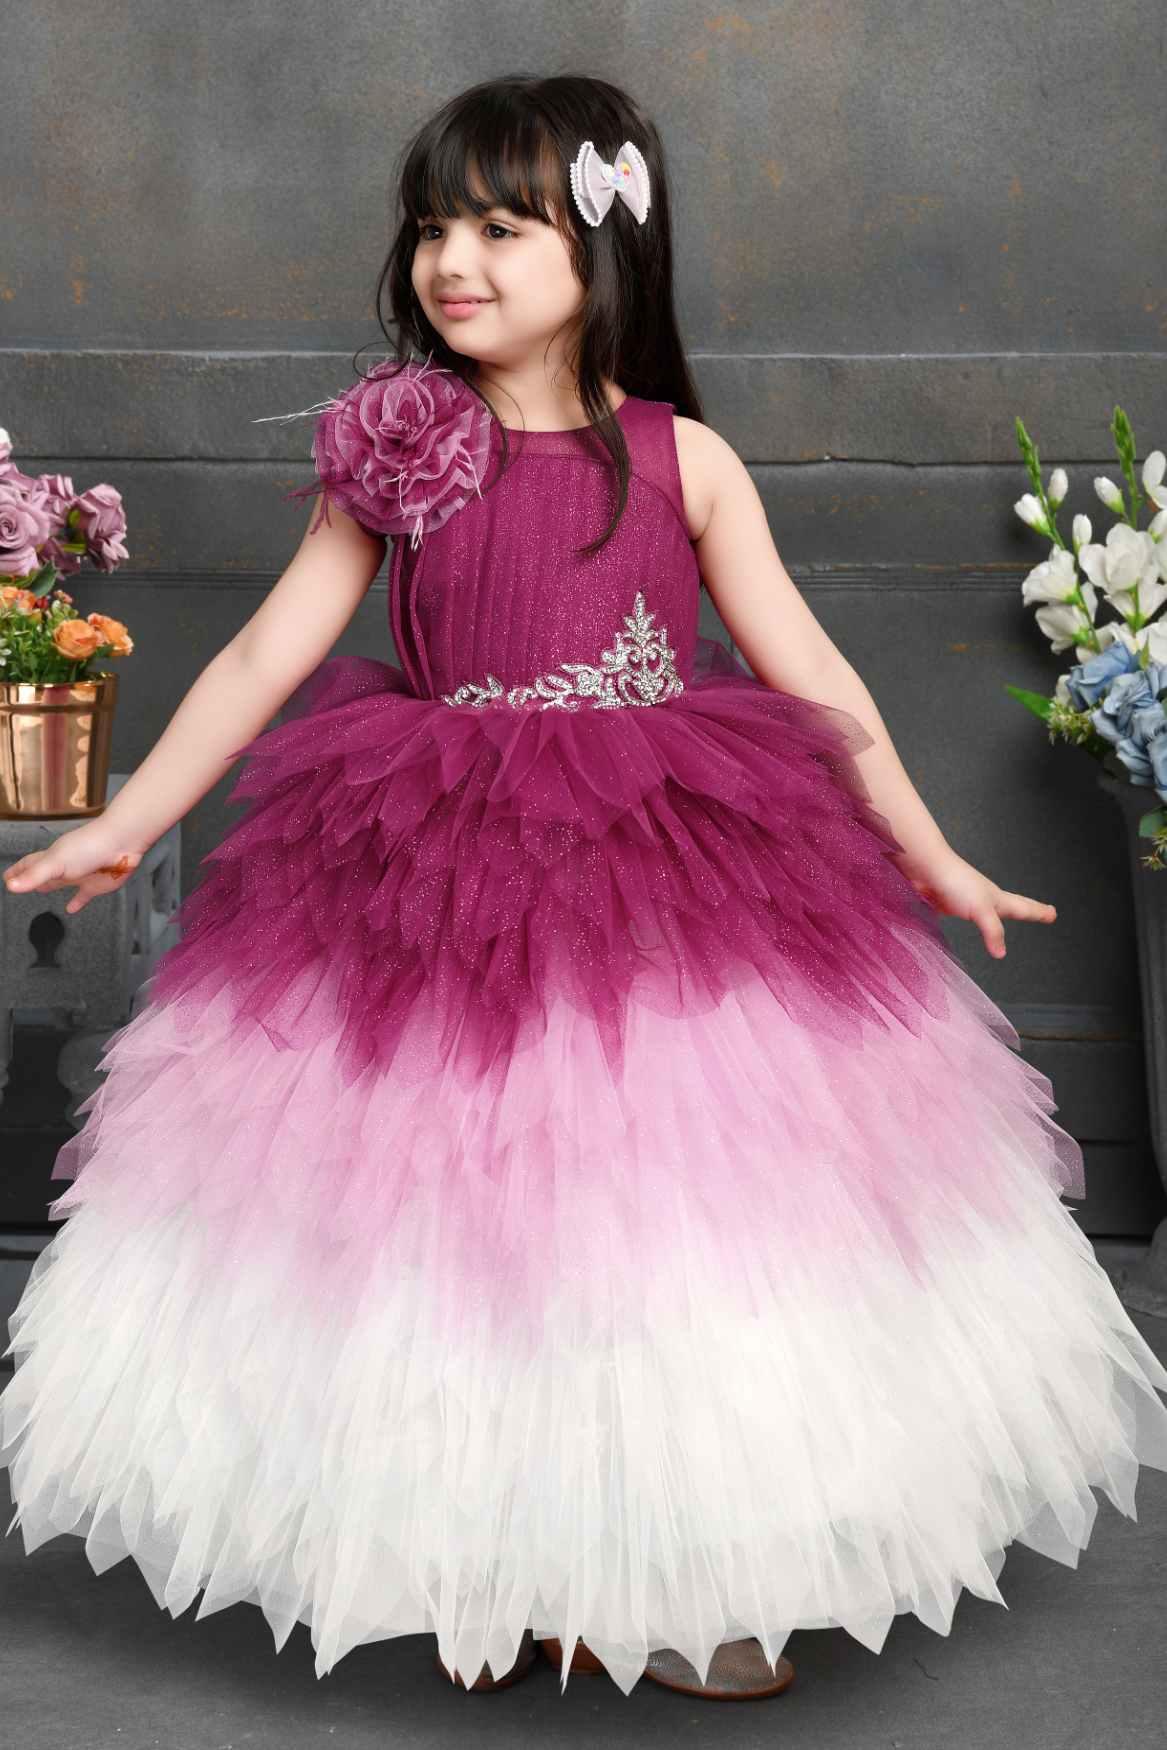 Magenta Princess Net Party Gown With Flower Embellishment For Girls - Lagorii Kids